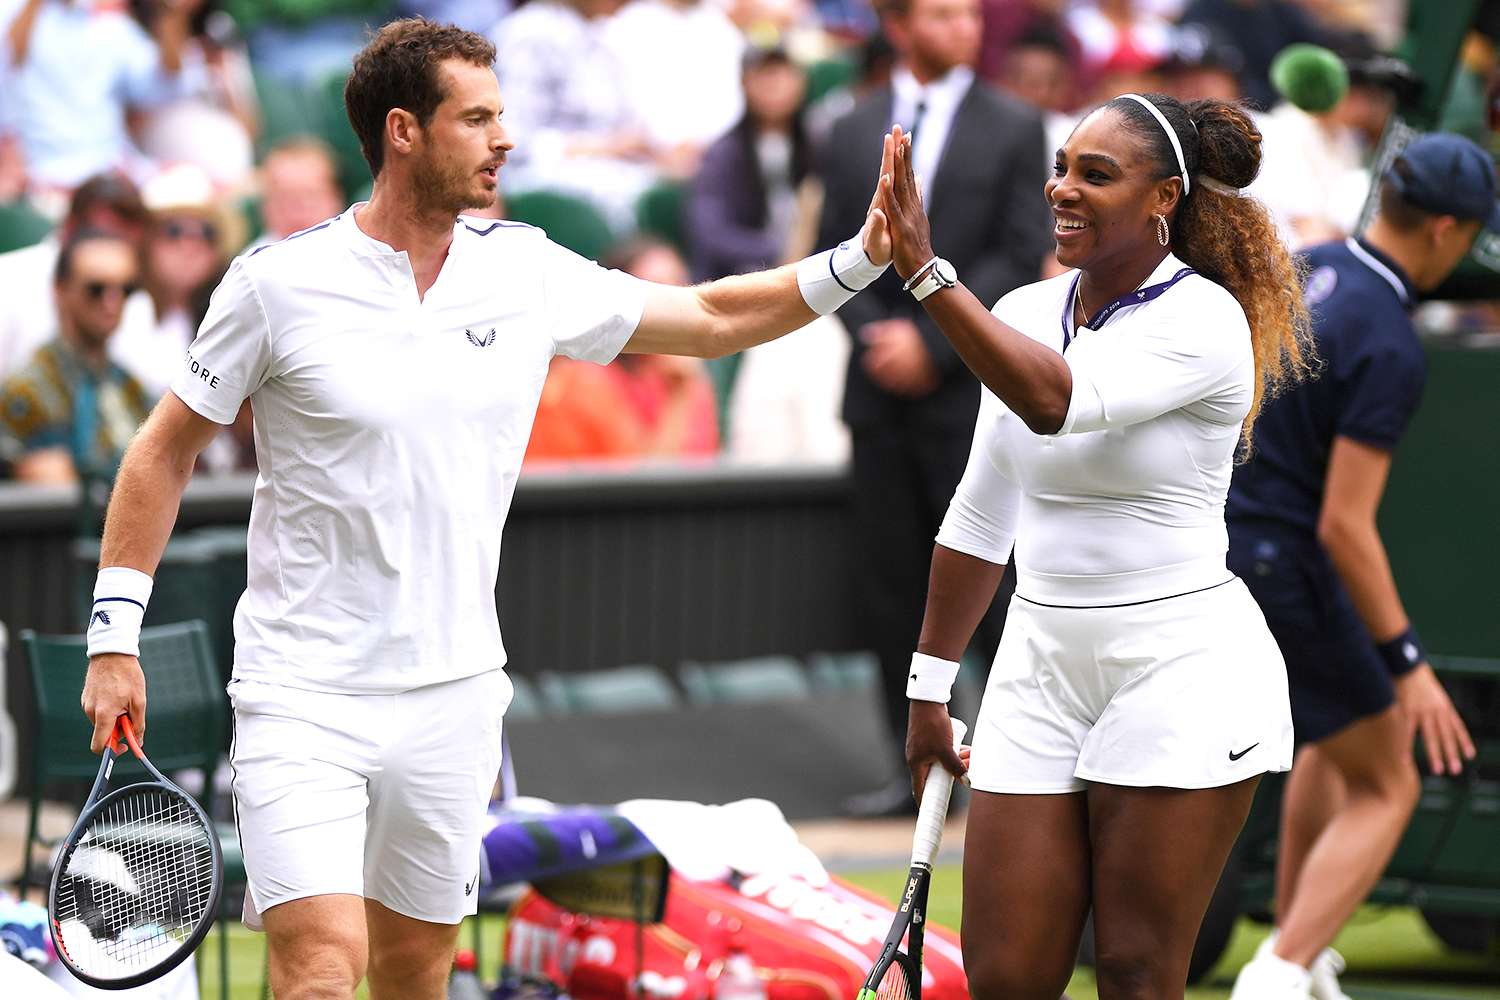 Andy Murray of Great Britain and Serena Williams of The United States react during their Mixed Doubles first round match against Andreas Mies of Germany and Alexa Guarachi of Chile during Day six of The Championships - Wimbledon 2019 at All England Lawn Tennis and Croquet Club on July 06, 2019 in London, England.